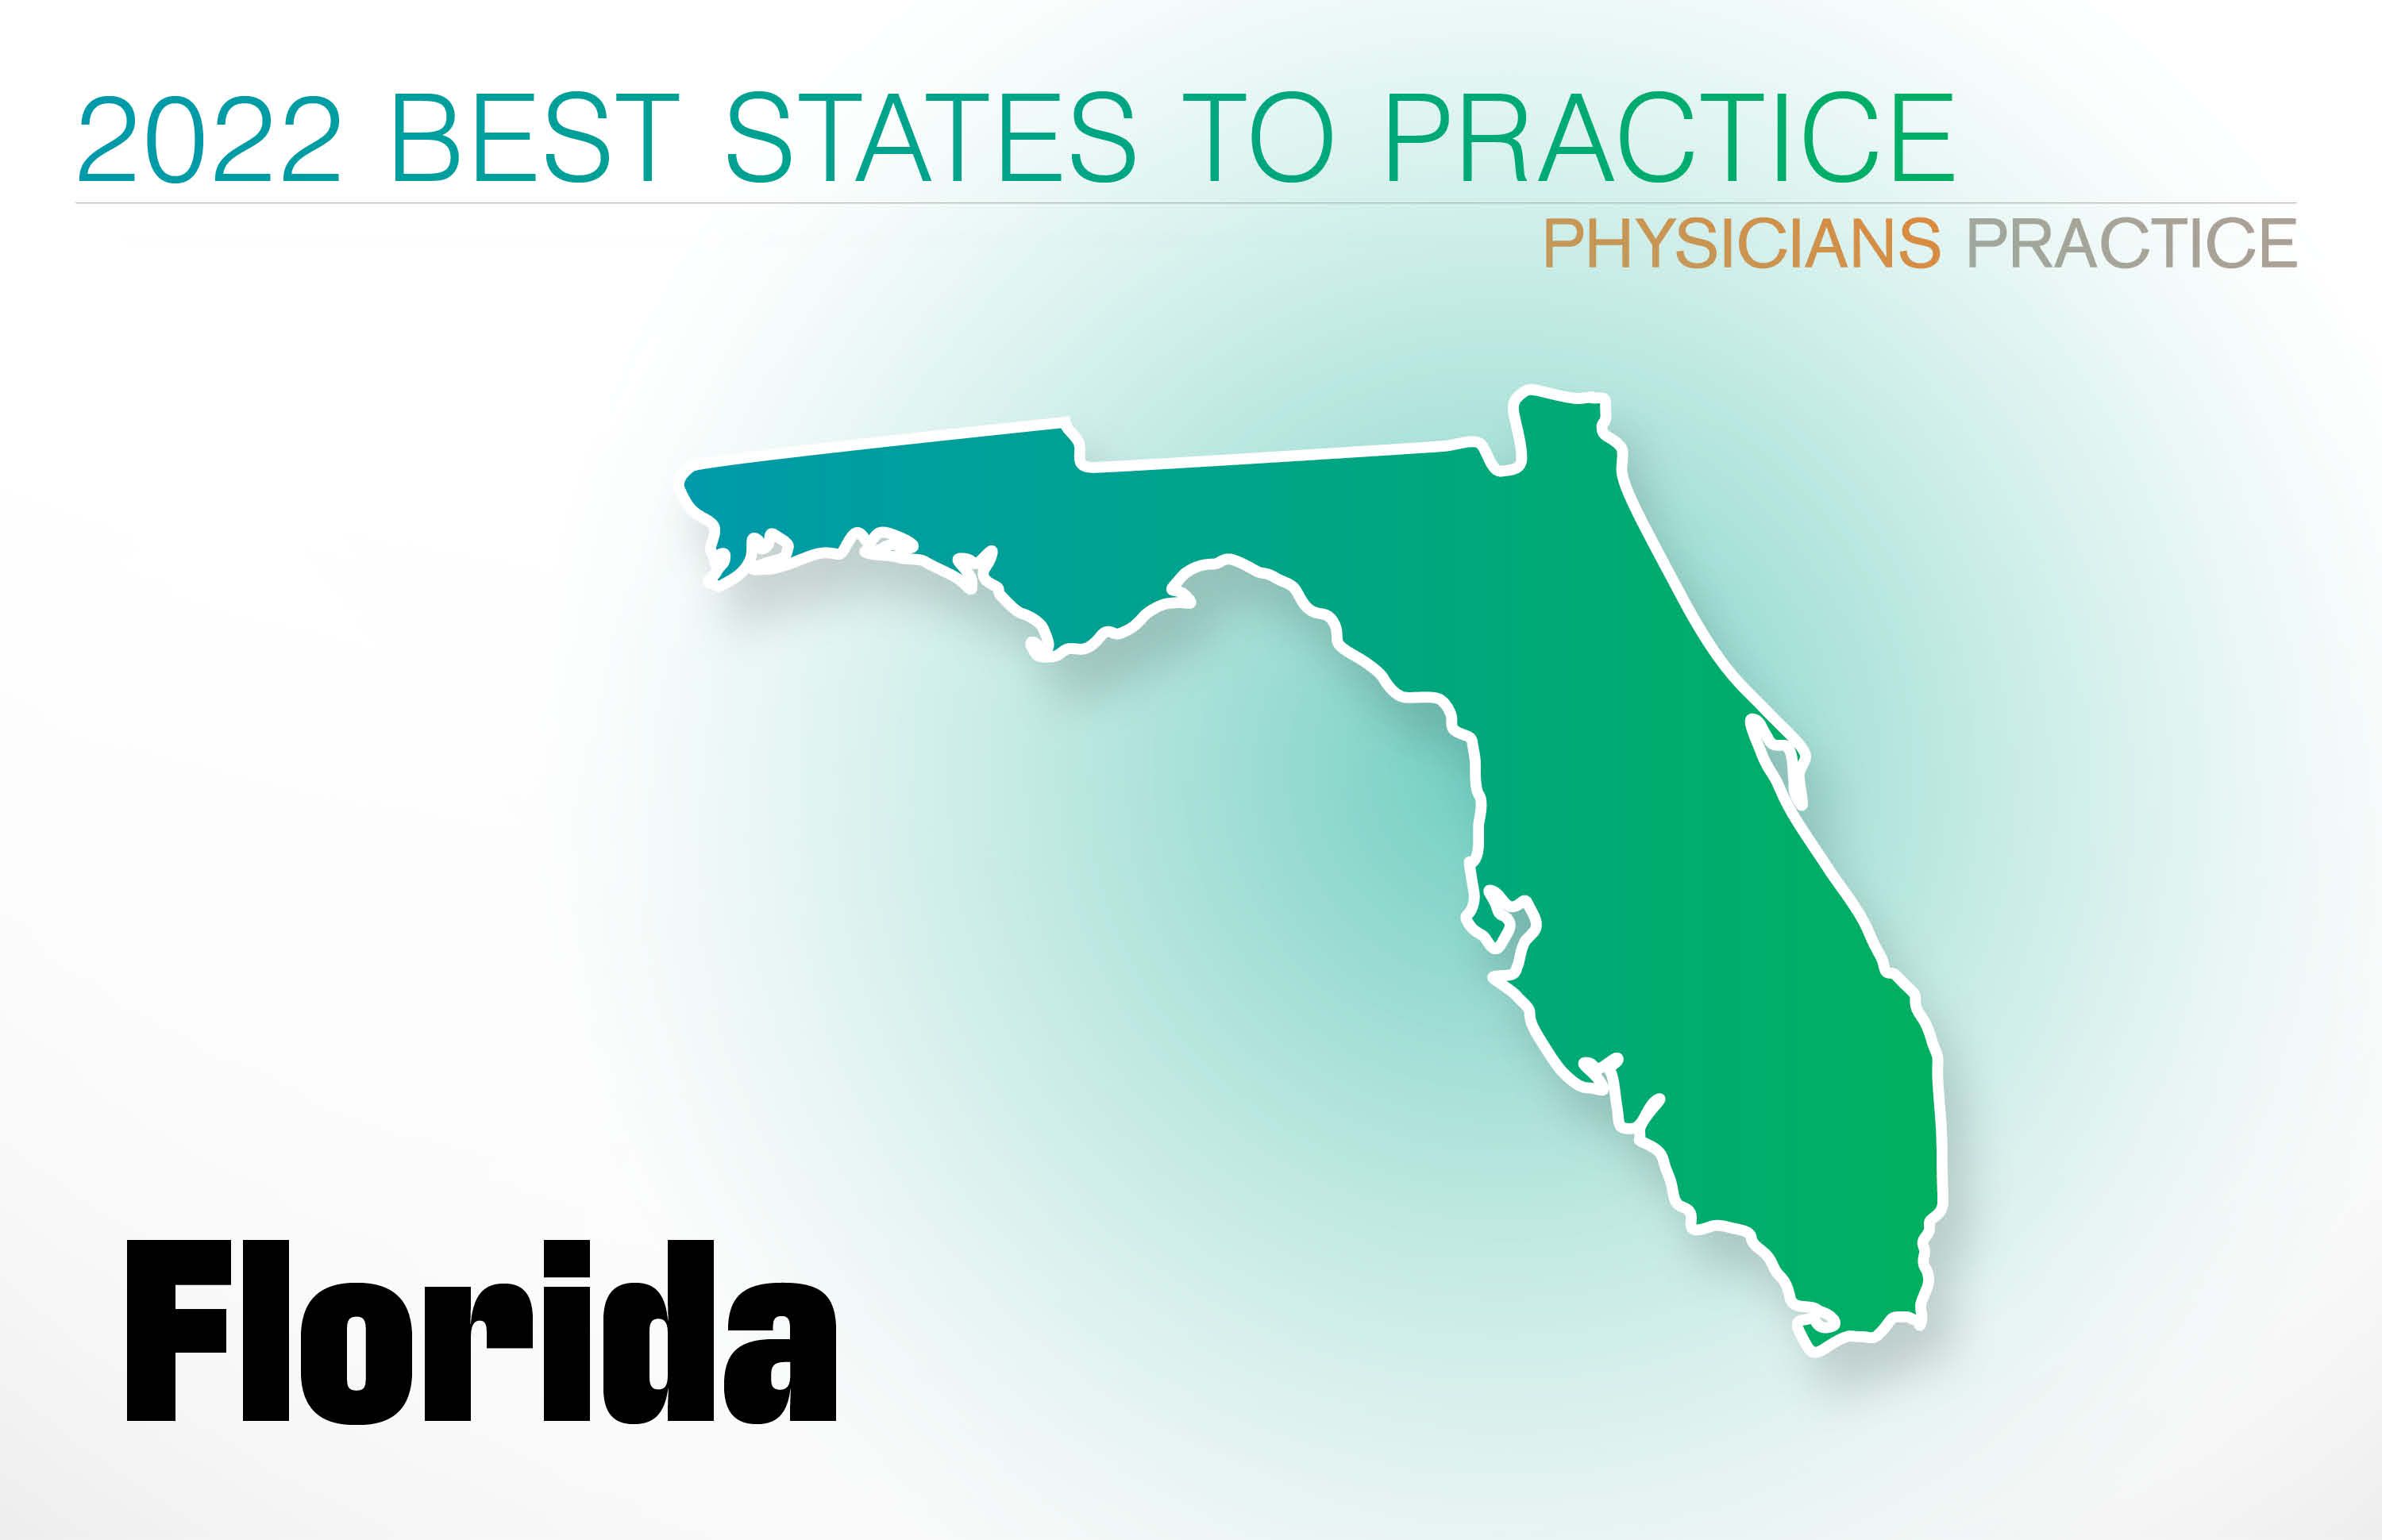 #28 Florida Rankings: Cost of living: 30 Physician density: 26 Amount of state business taxes collected: 4 Average malpractice insurance rates: 51 Quality of life: 1 GPCI: 51